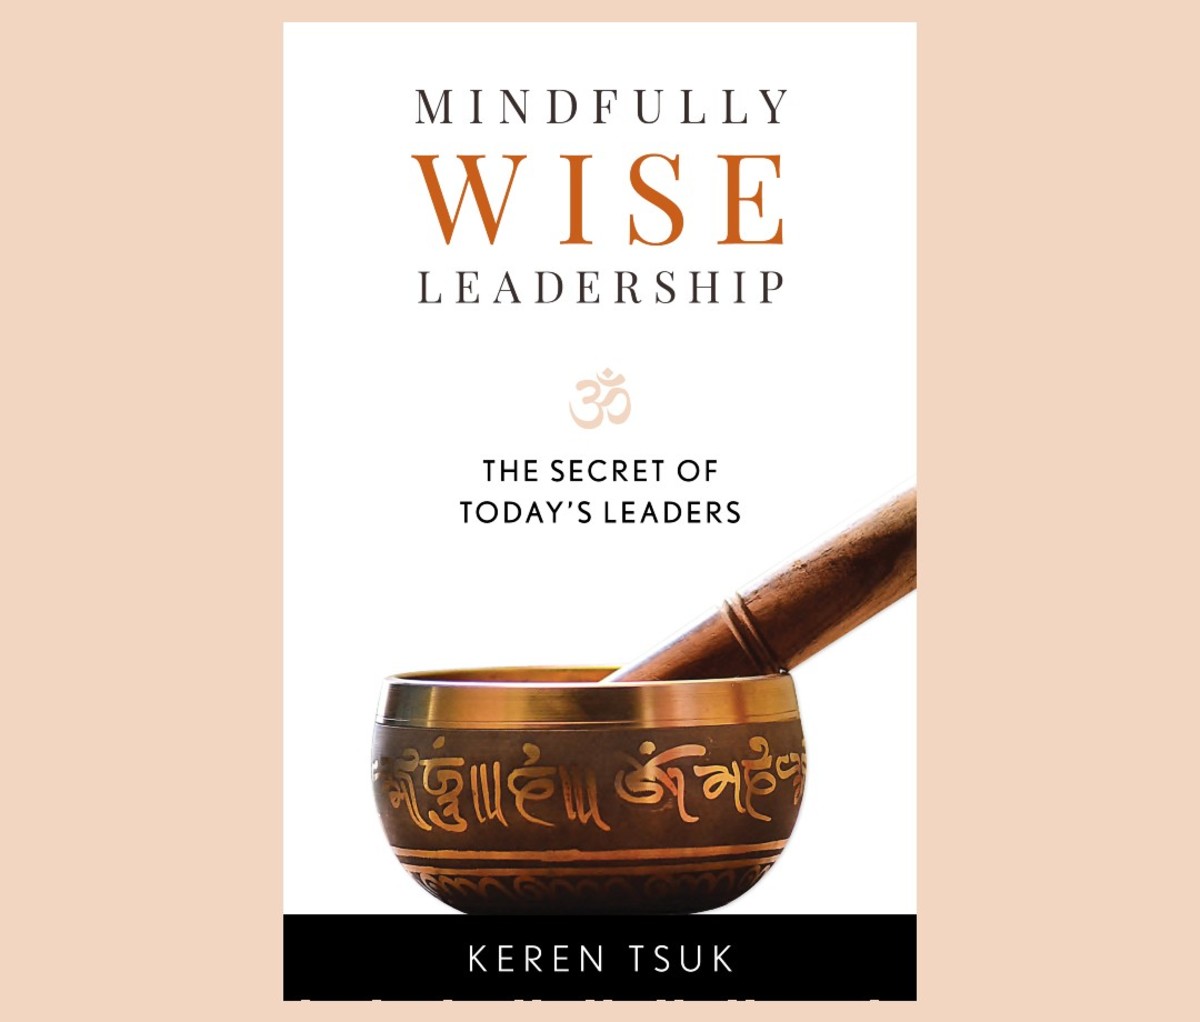 Mindfully Wise Leadership: The Secret of Today’s Leaders by Keren Tsuk, PhD